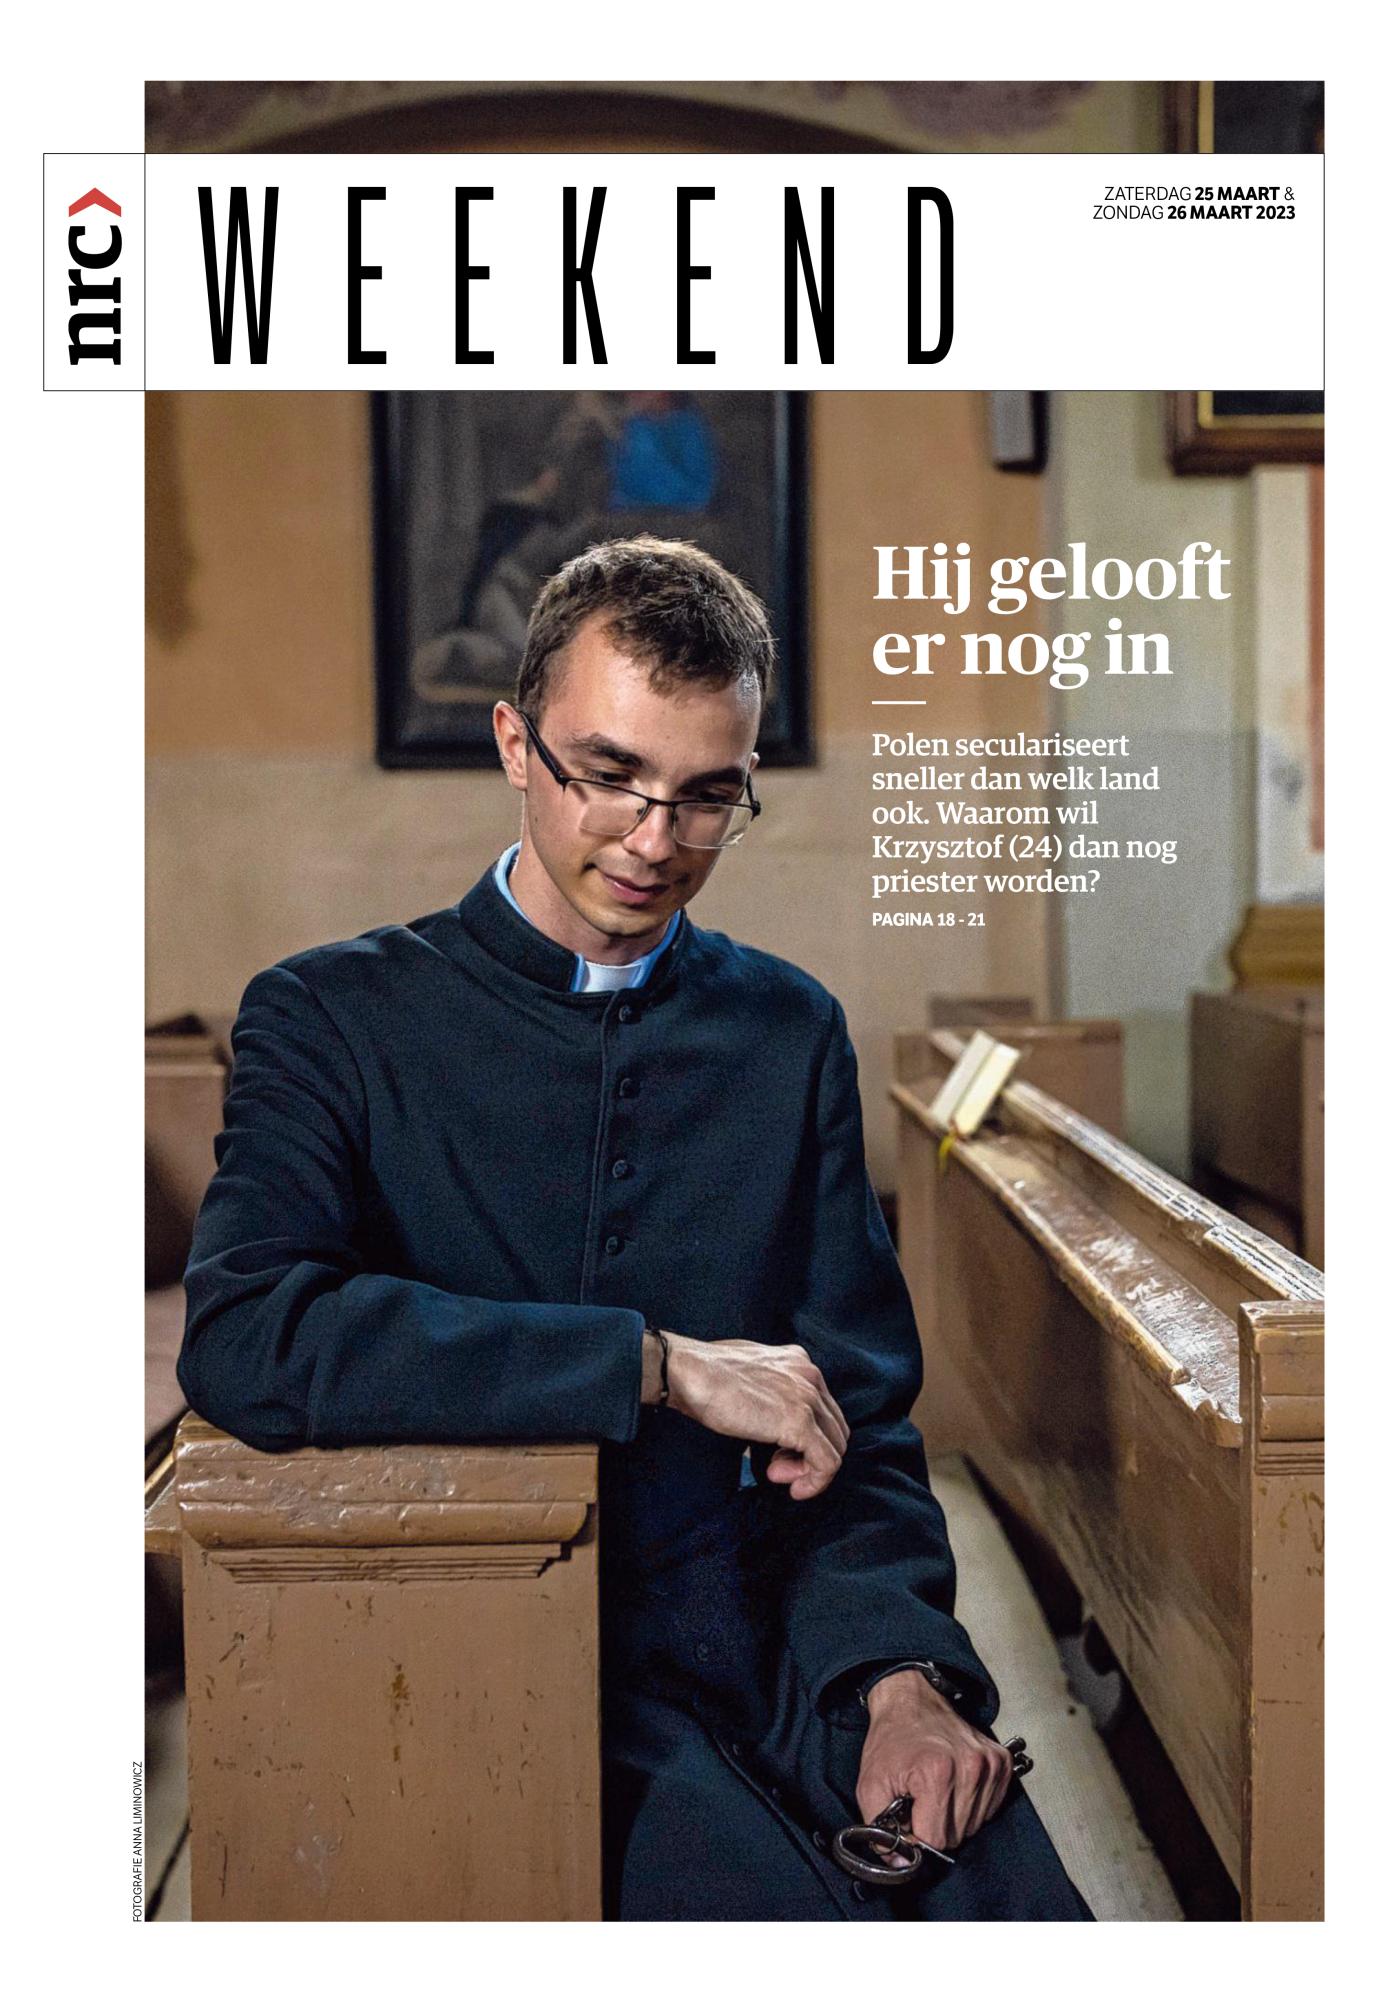 LONELY POLISH PRIEST -for NRC - 